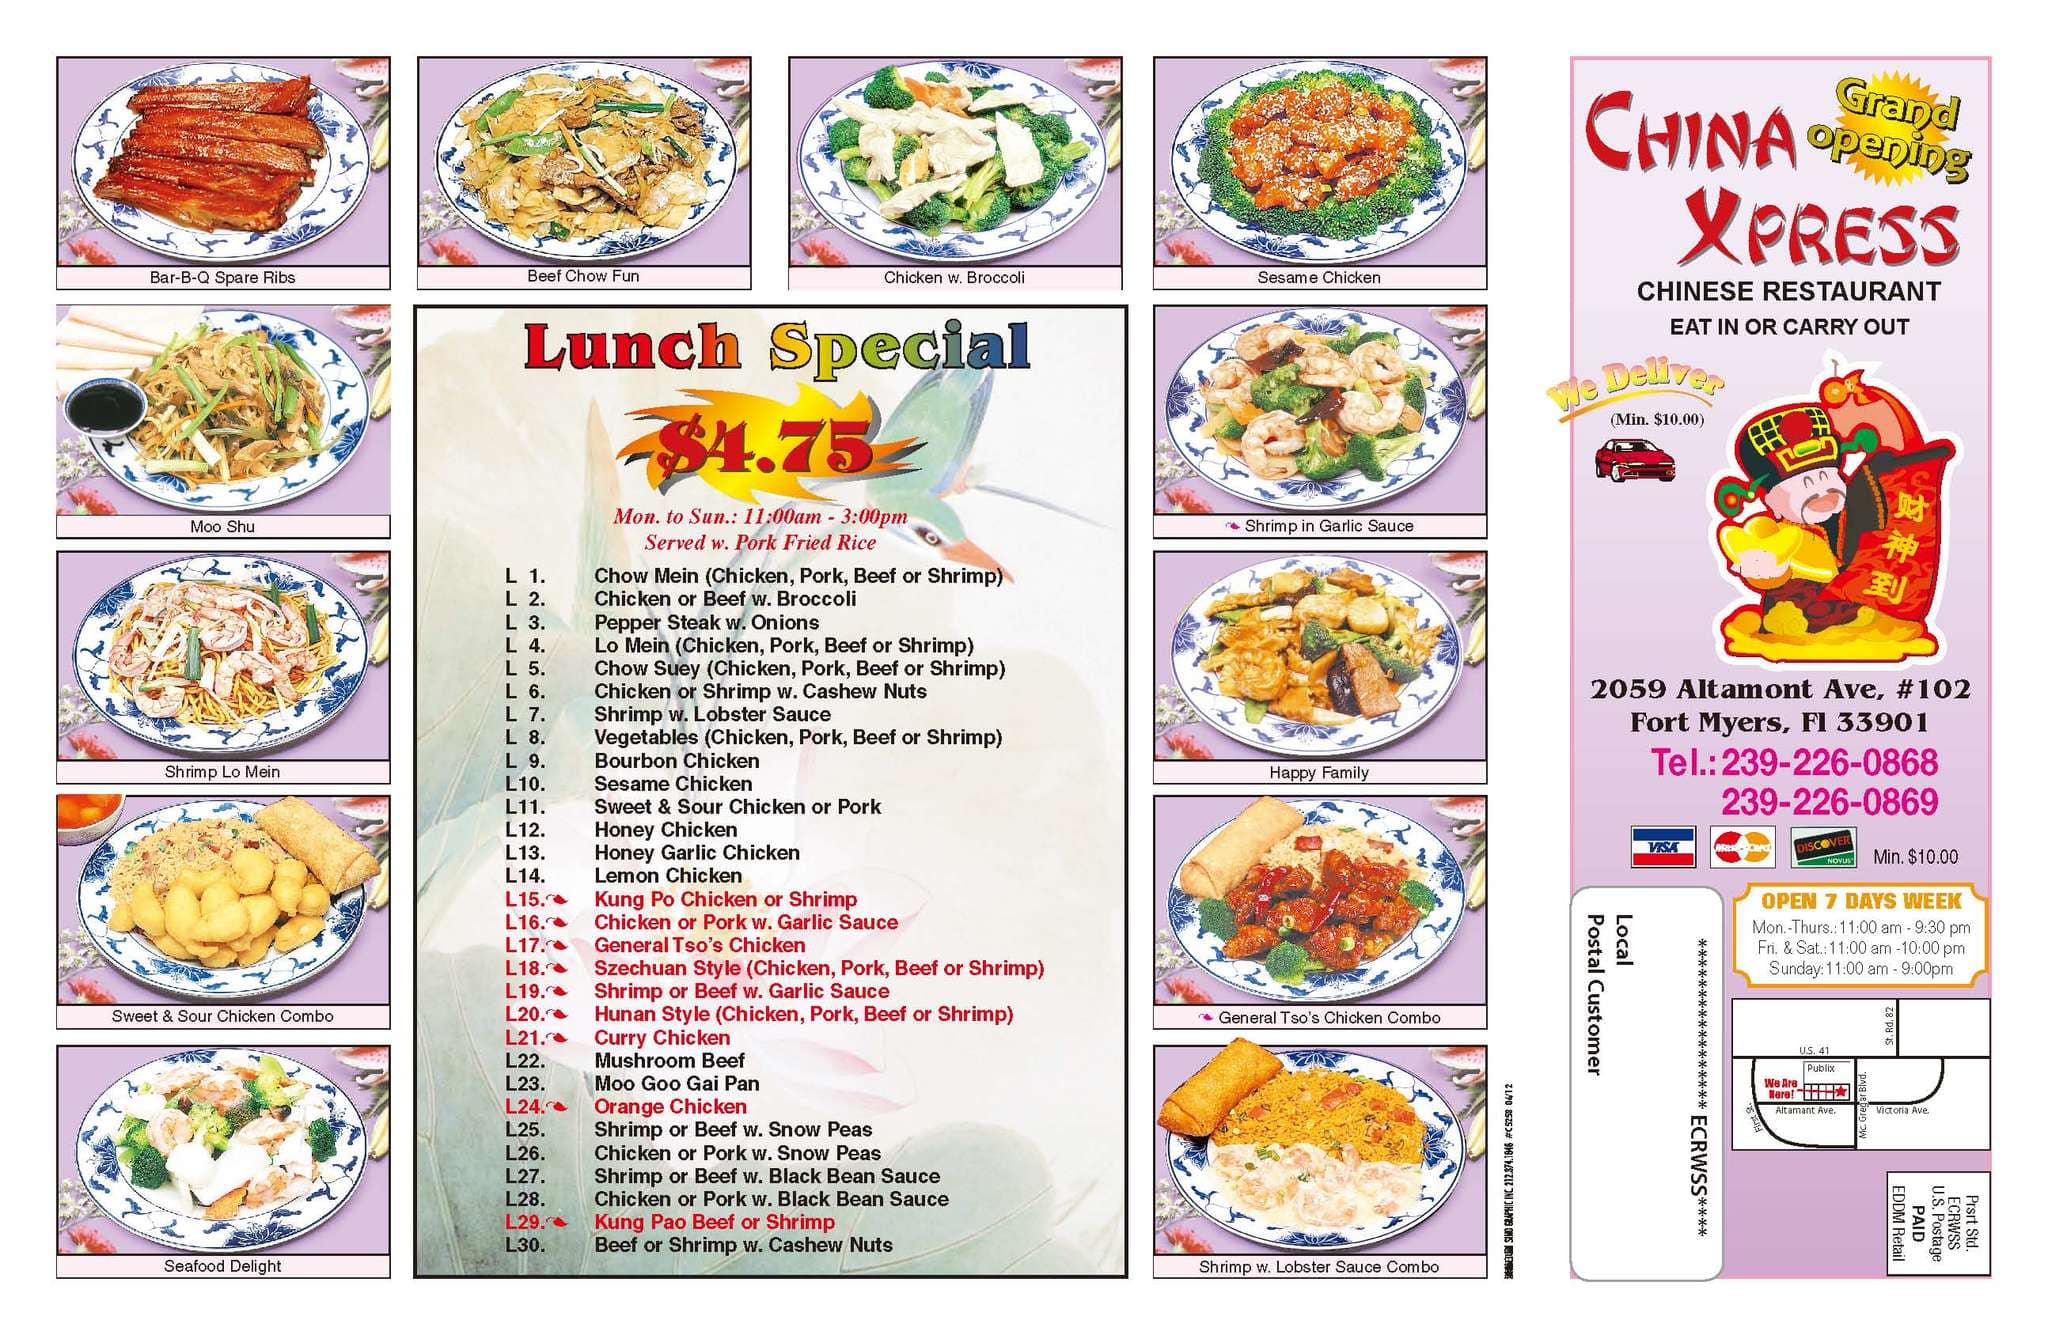 Get the latest China Wok menu and prices along with the restaurants locatio...